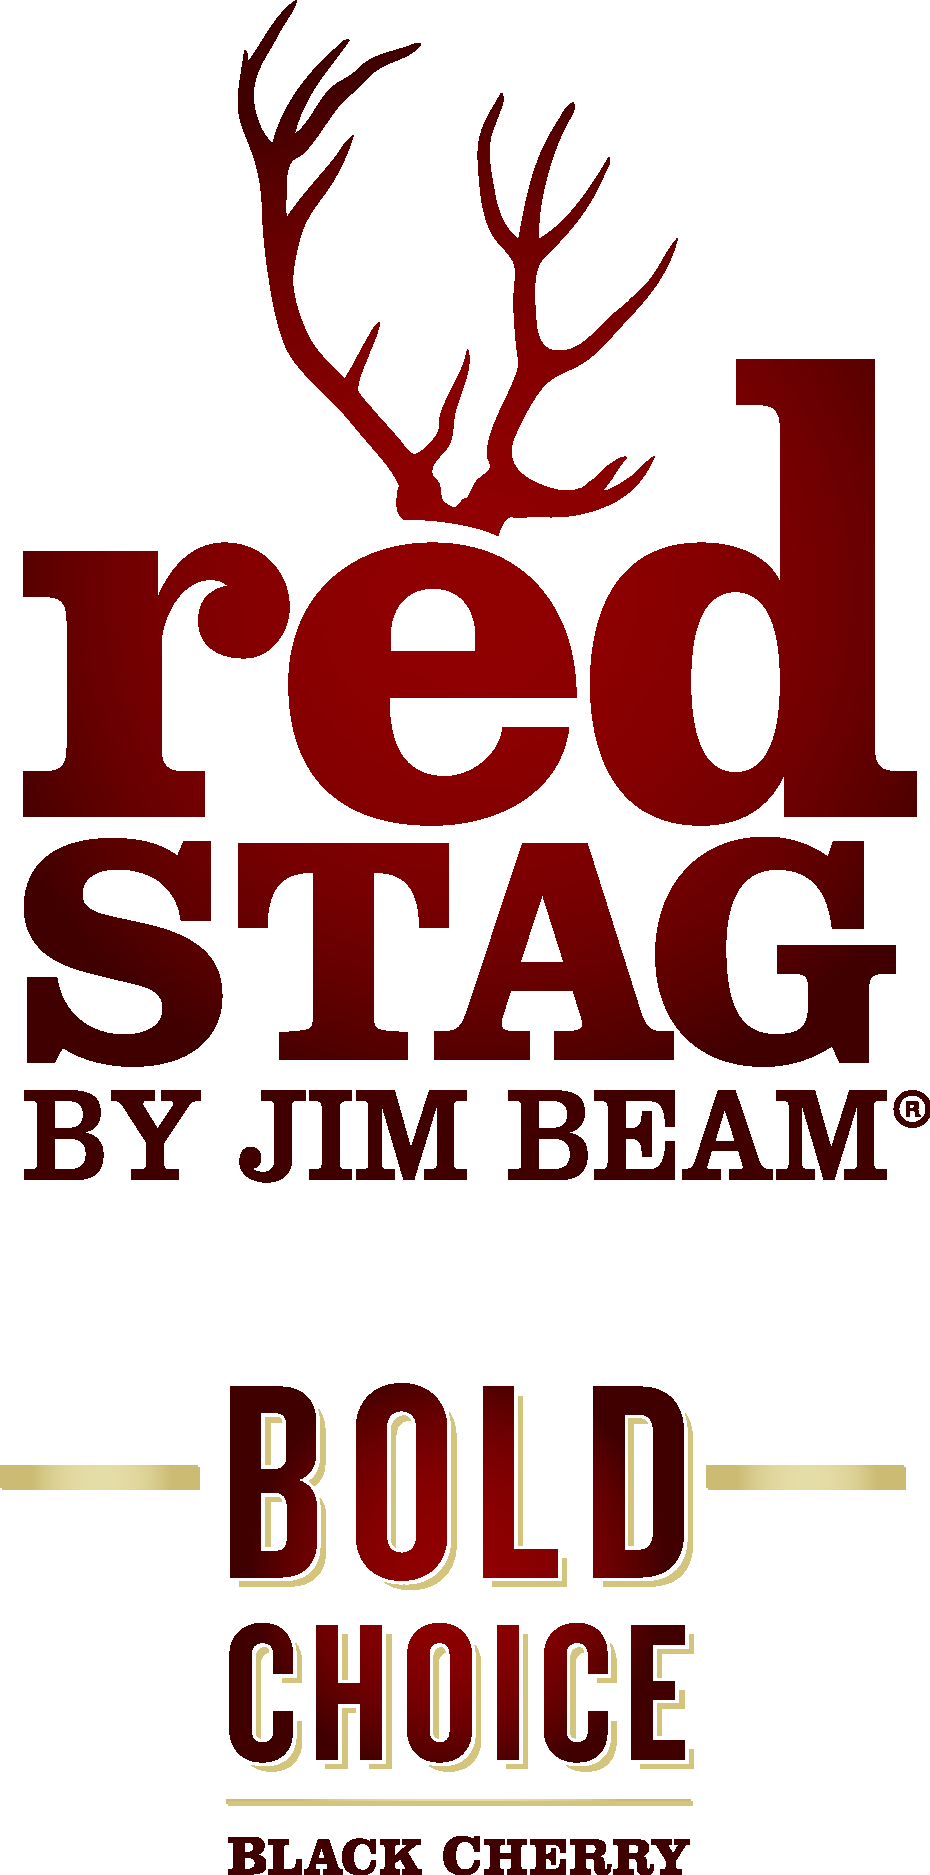 Red Stag Logo Vector